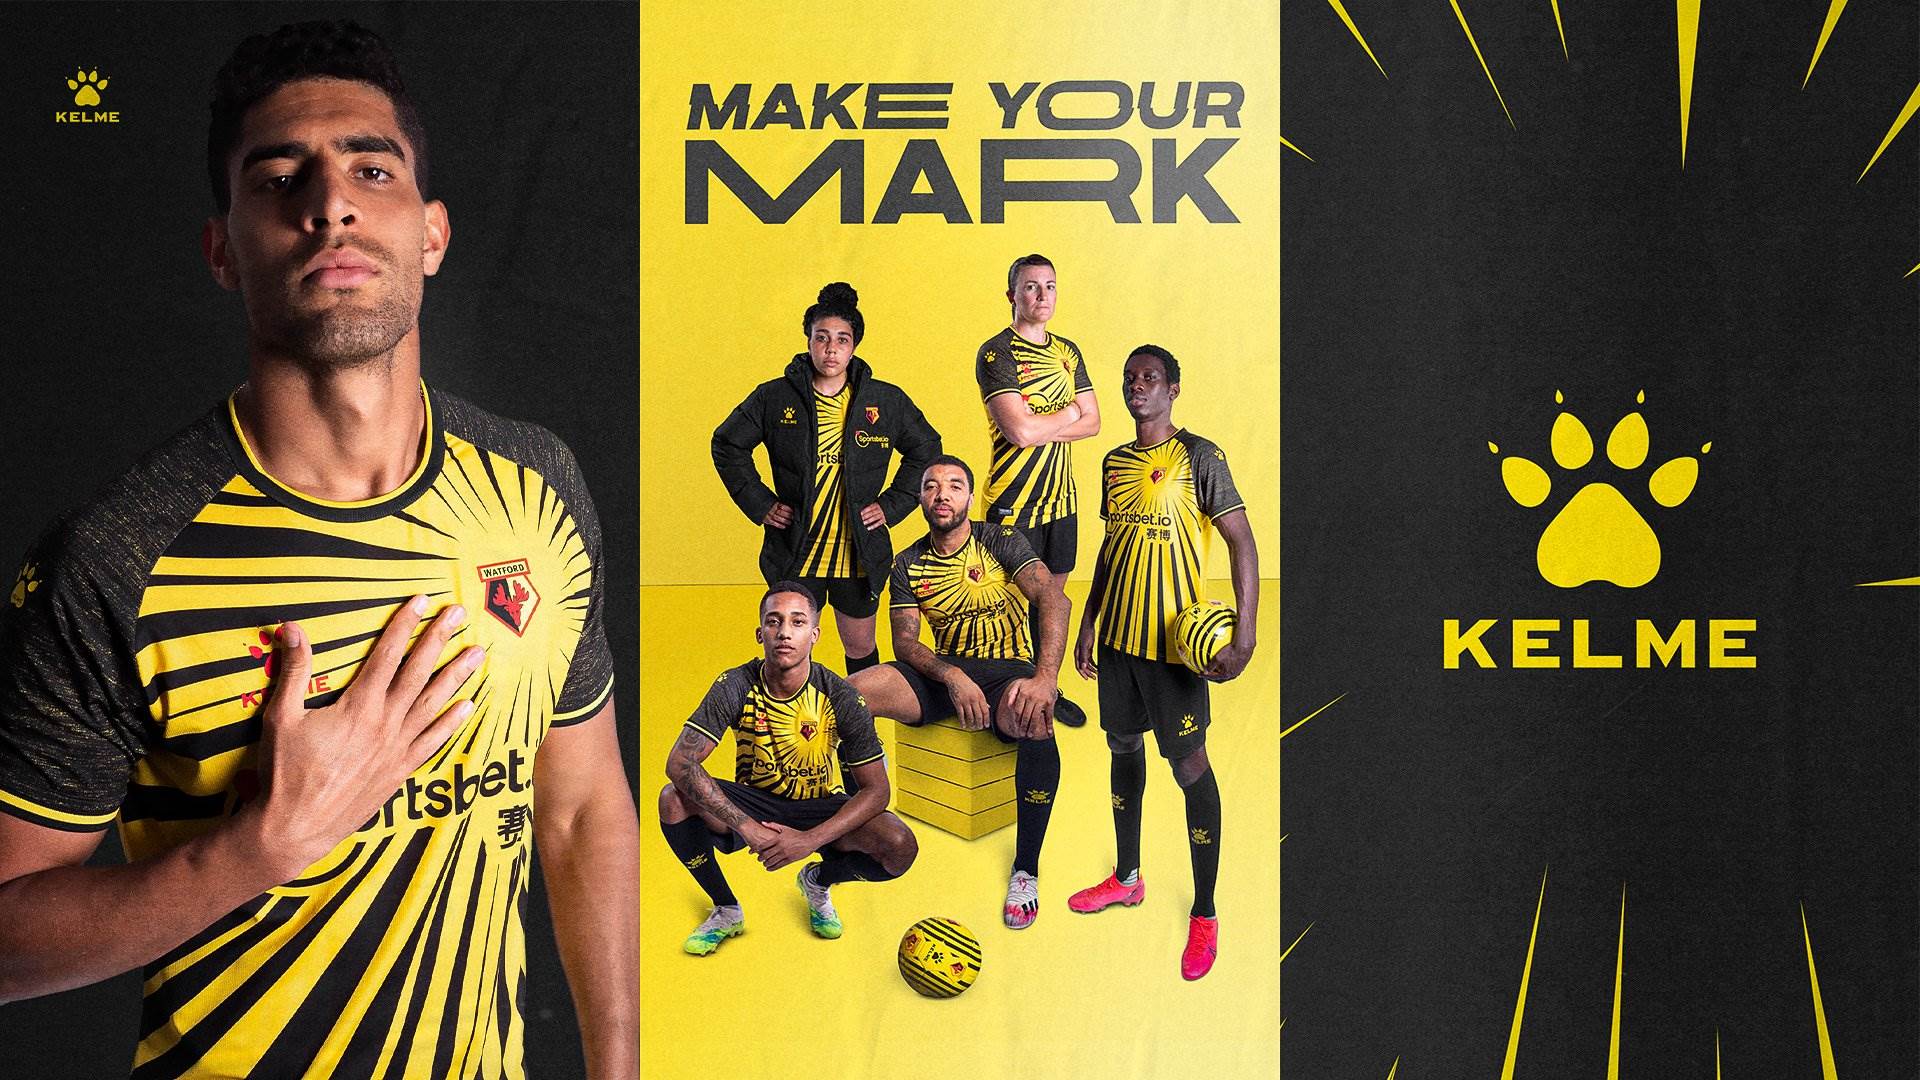 Kaizer Chiefs Reacts To 'Identical' Black / Gold Barcelona Kit - Footy  Headlines